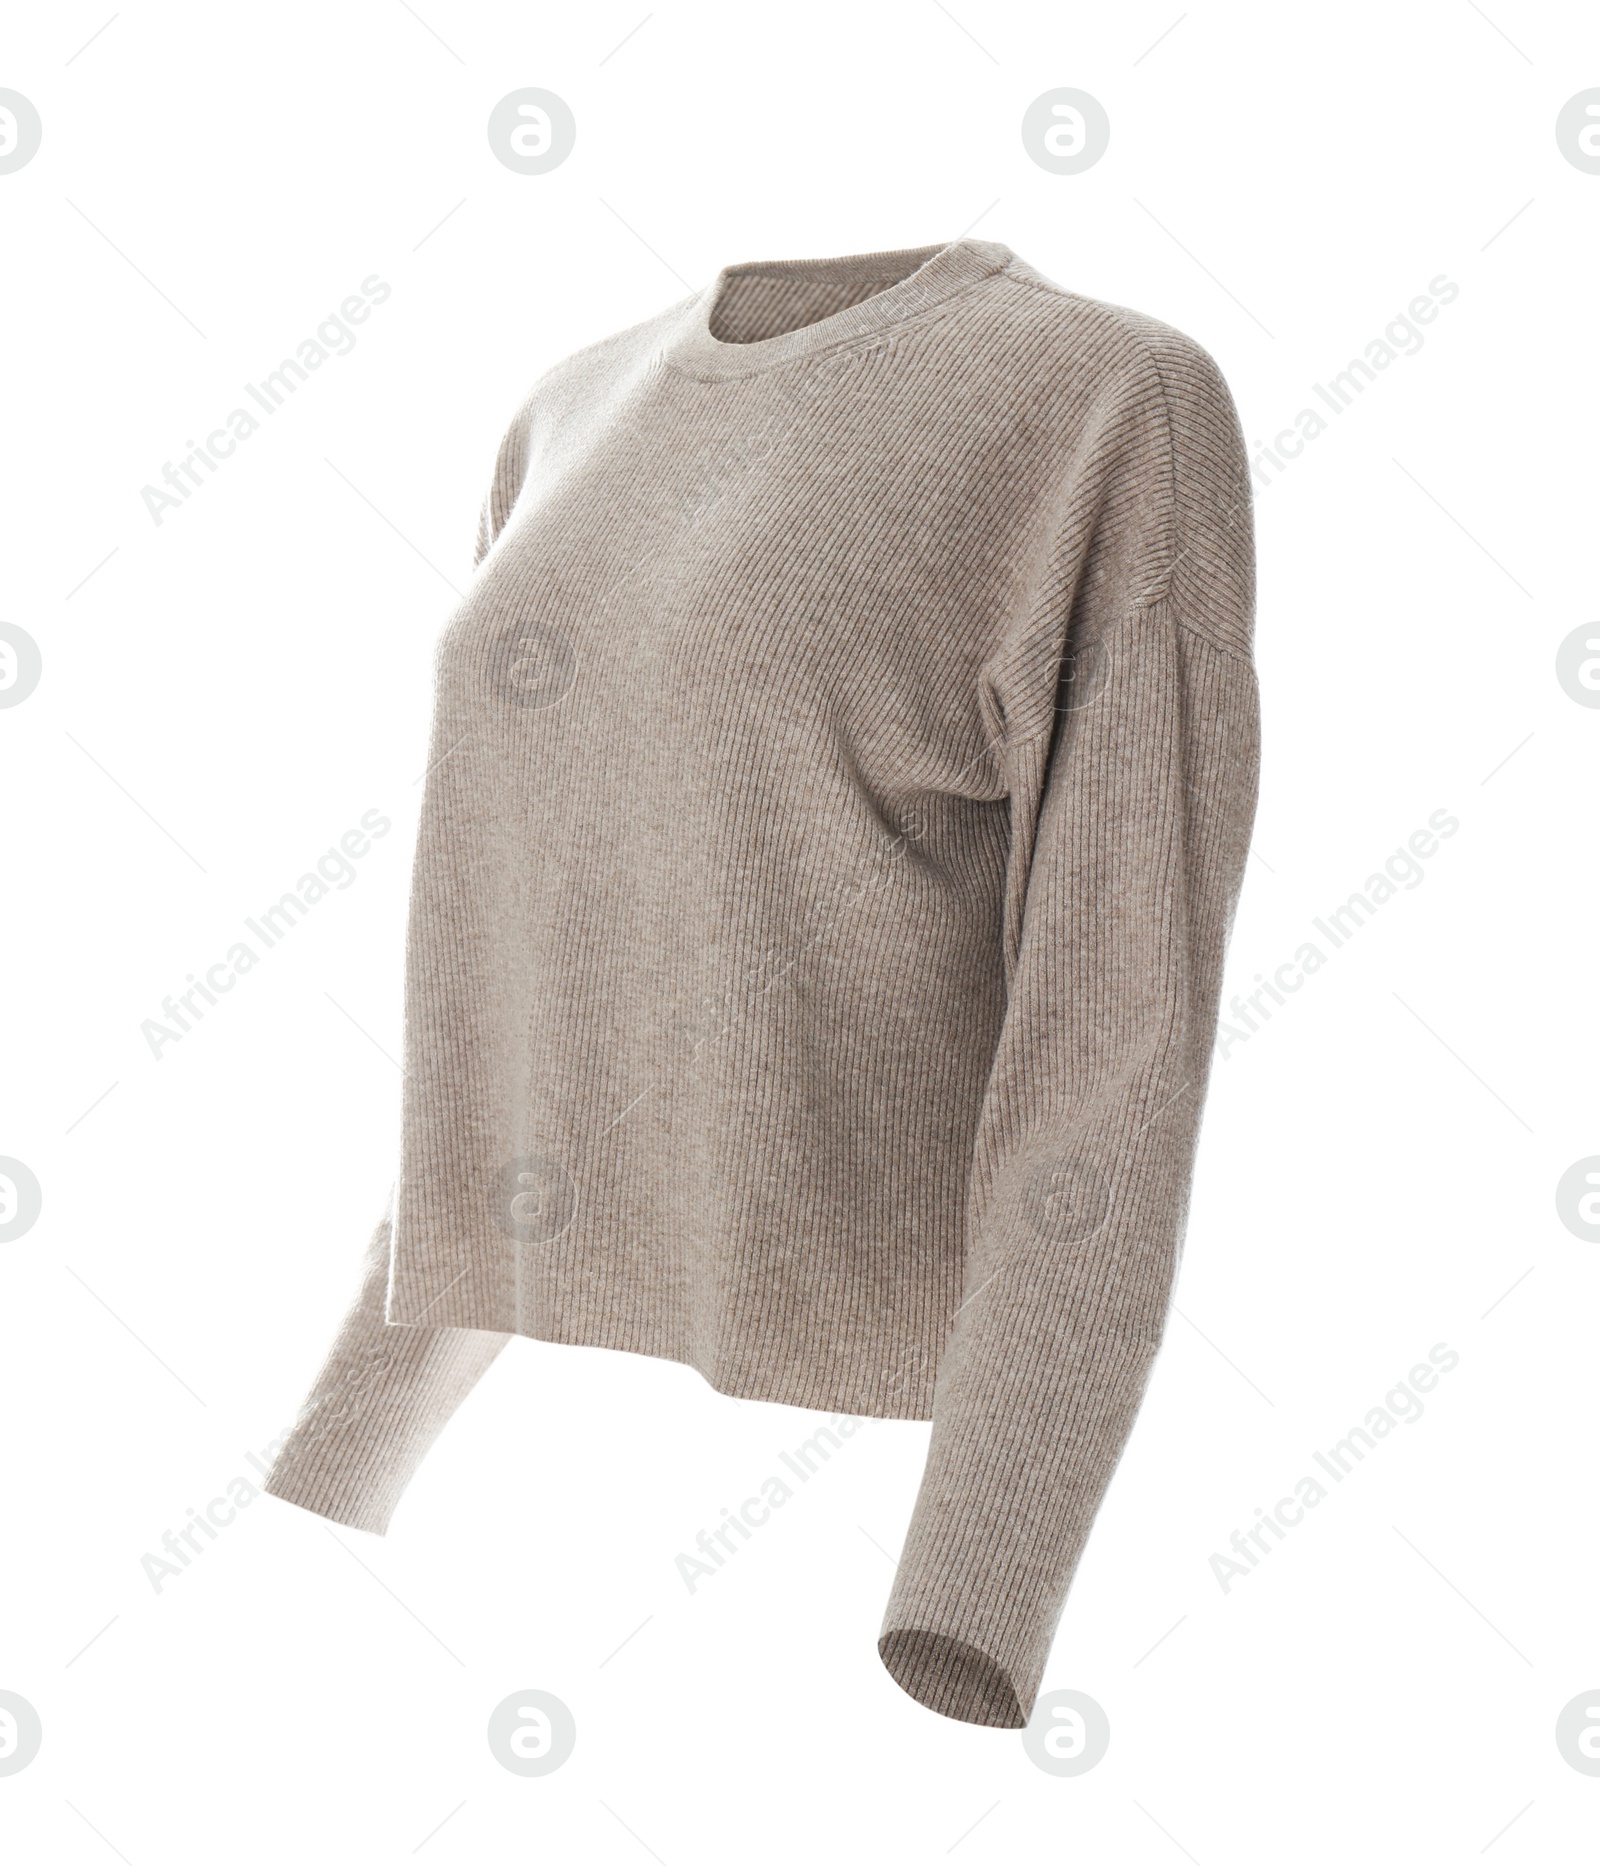 Photo of Stylish sweater on mannequin against white background. Women's clothes